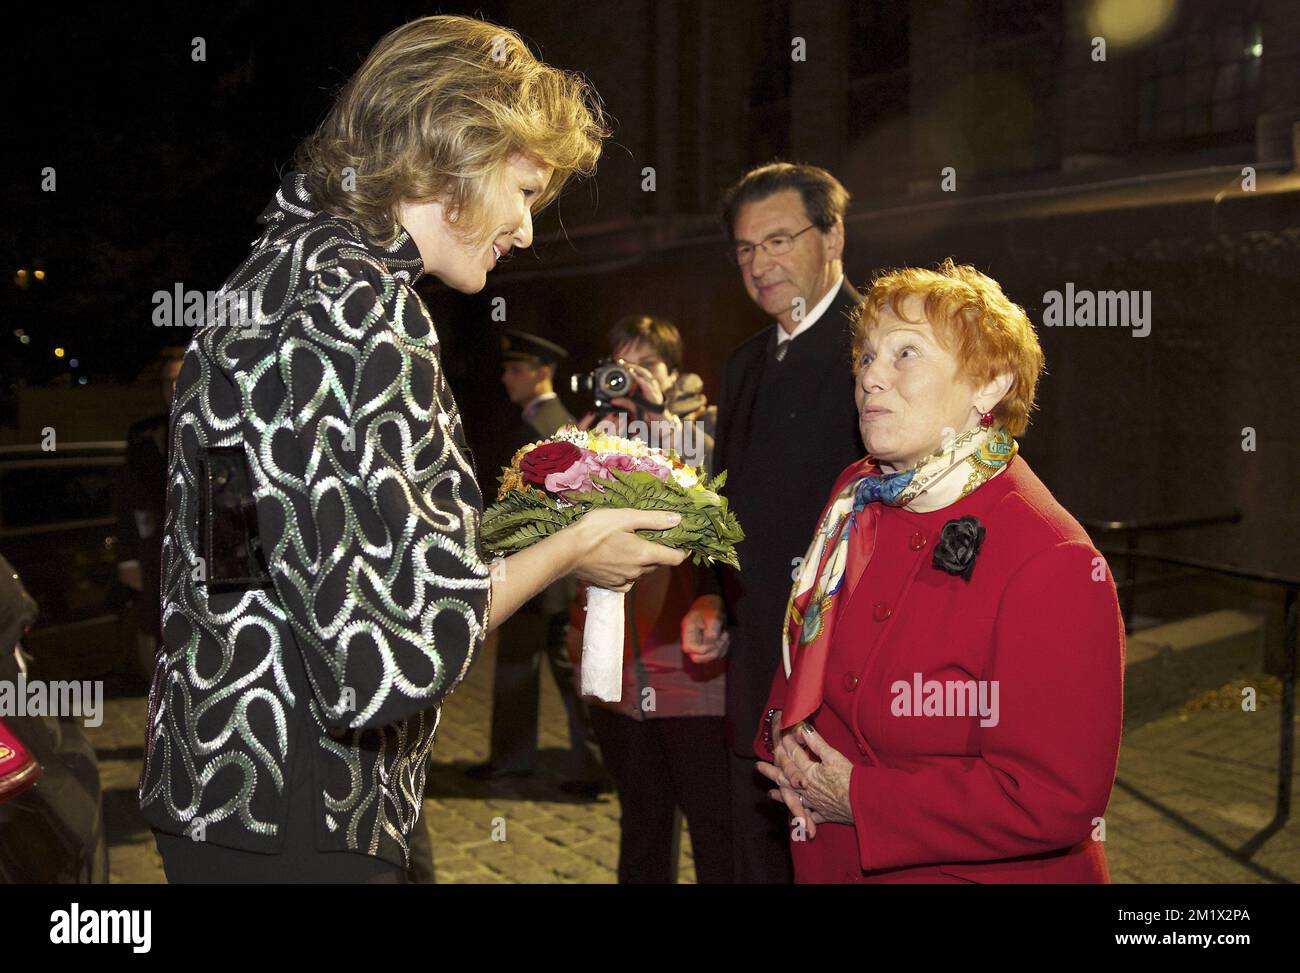 20141109 - BRUSSELS, BELGIUM: Queen Mathilde of Belgium received flowers from Miss Huart after a royal visit to the '1000 Voices for Peace' concert to commemorate World War I, Sunday 09 November 2014 in Brussels. BELGA PHOTO NICOLAS MAETERLINCK Stock Photo